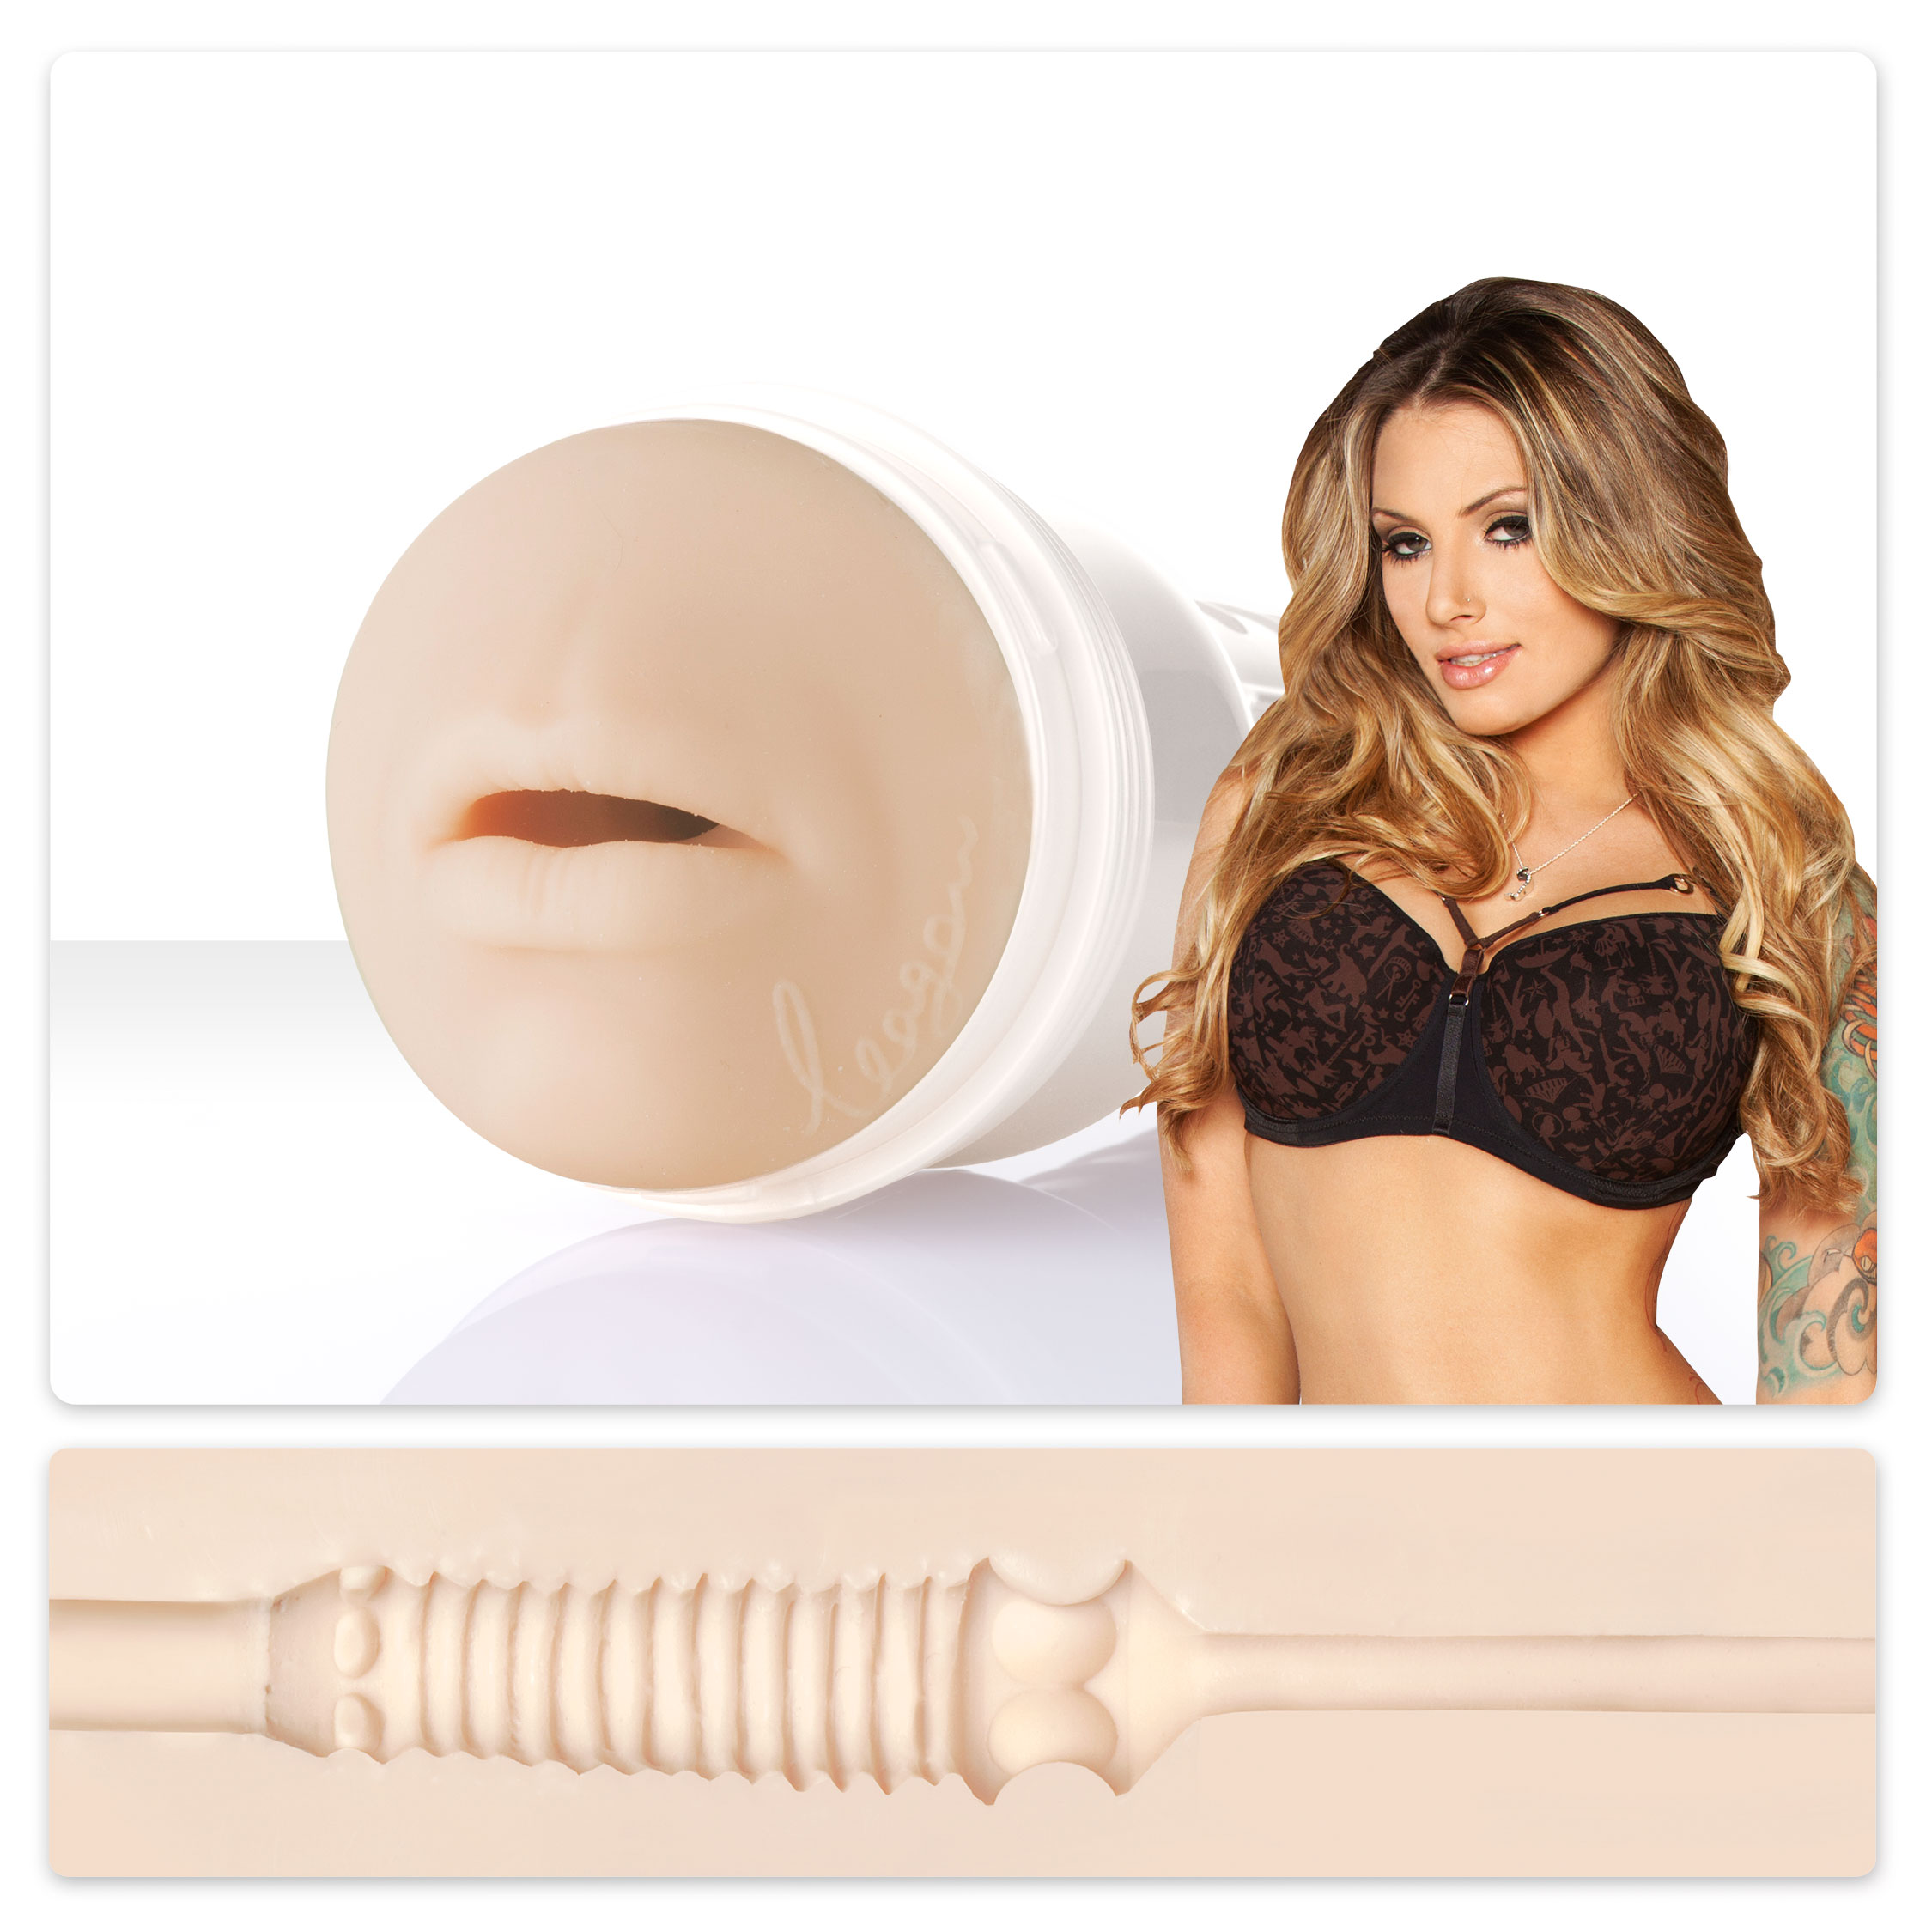 Fleshlight Girls Teagan Presley Swallow is the absolute most realistic oral...